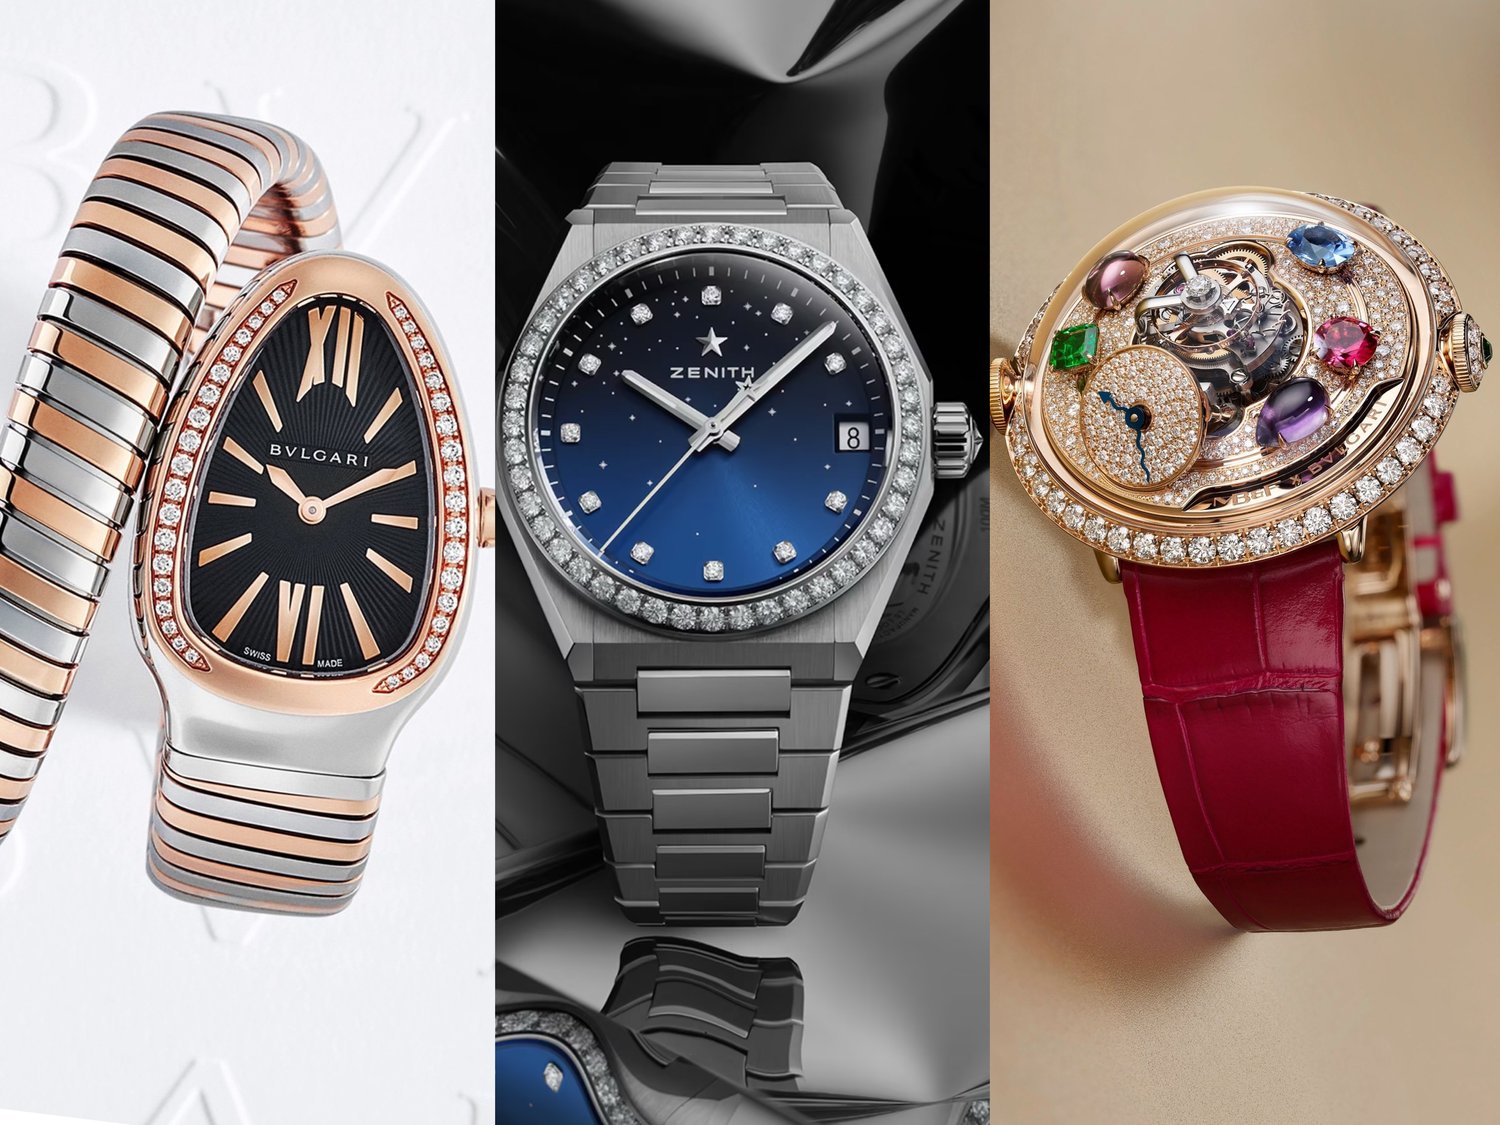 The Best Luxury Watch Brands For Resale in 2022